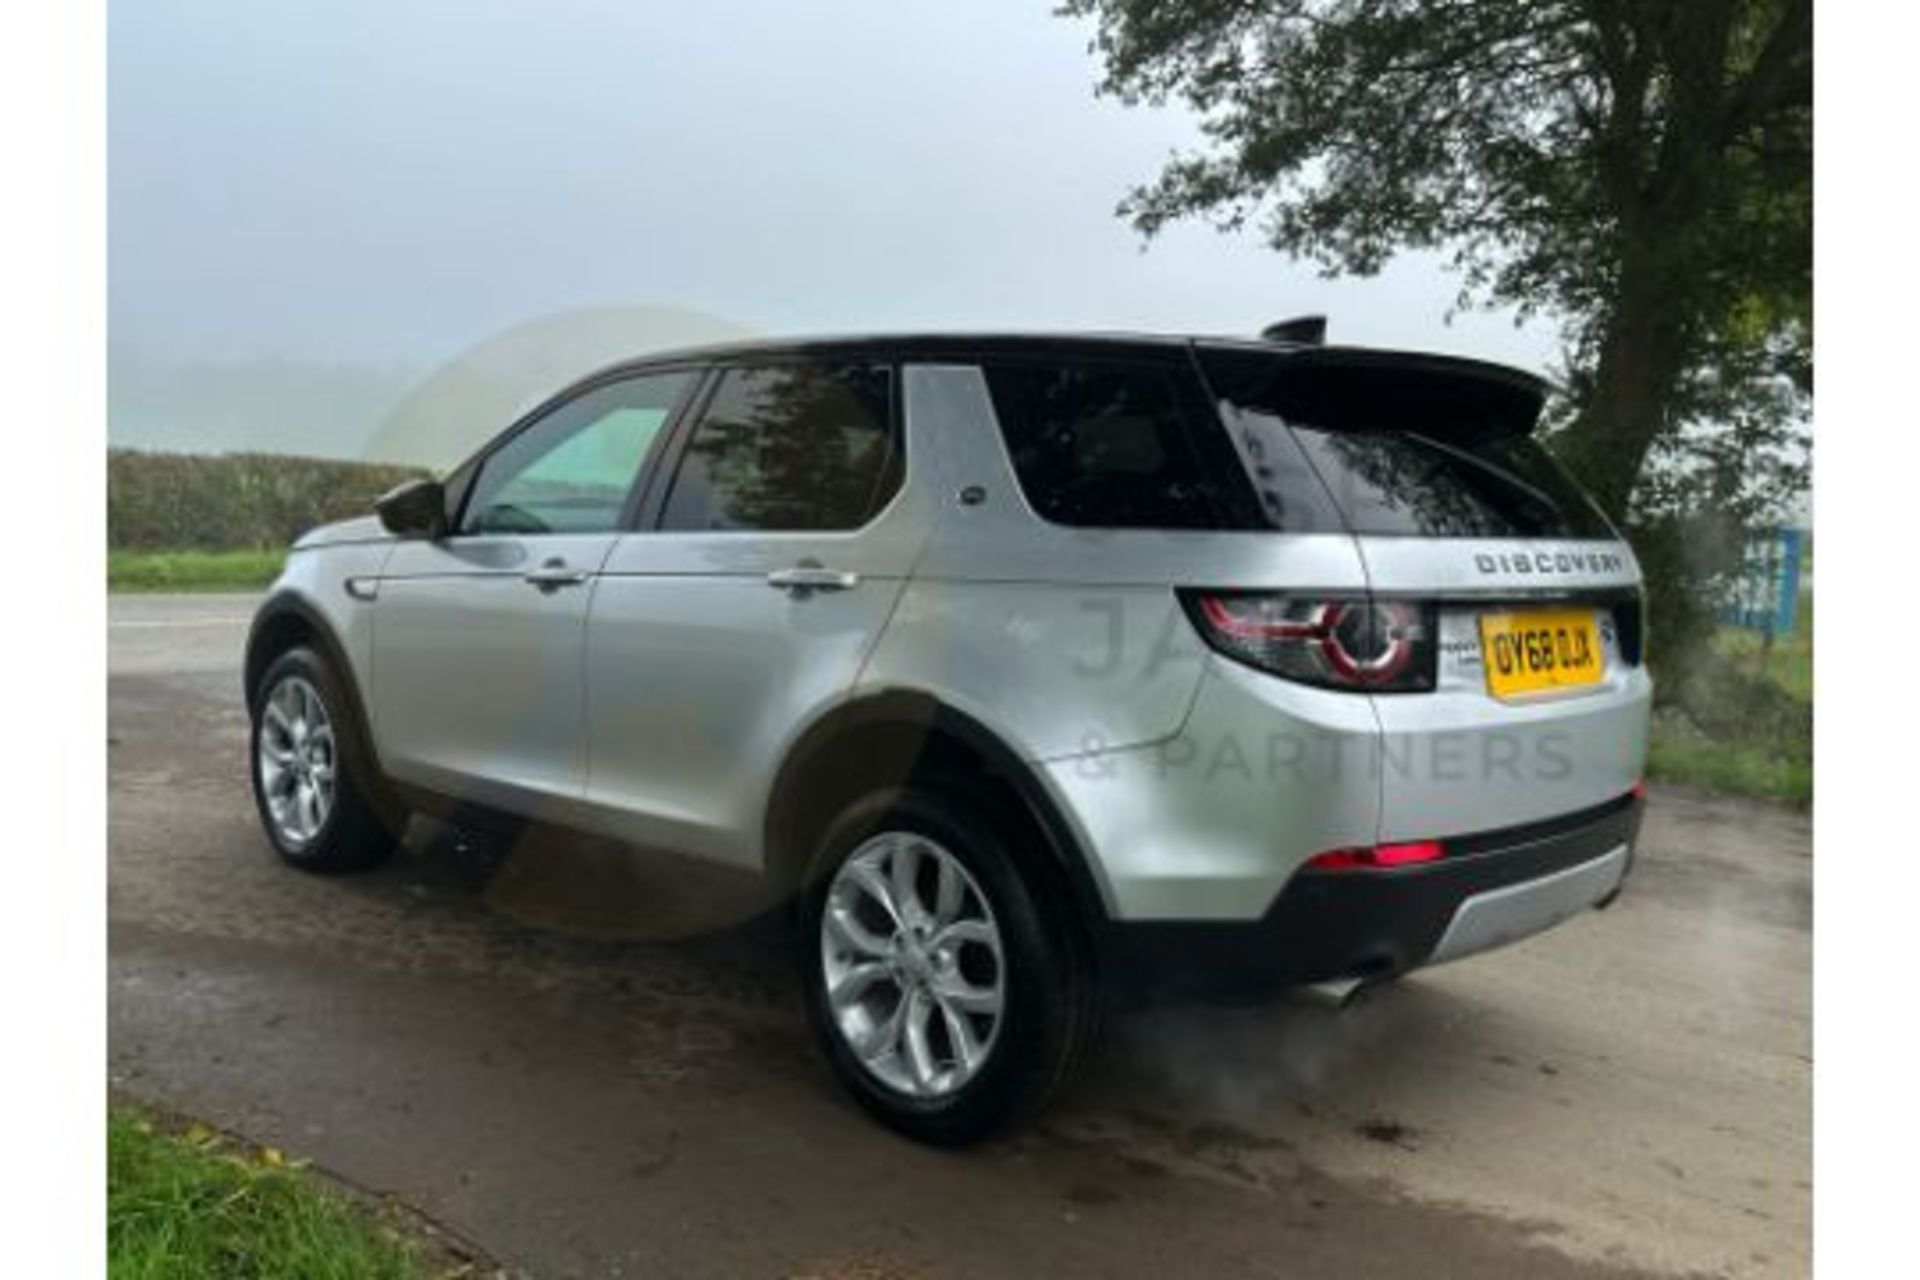 (ON SALE) LANDROVER DISCOVERY SPORT "HSE" EDITION 2.0 TD4 (180) AUTOMATIC - 68 REG - PAN ROOF - Image 9 of 51